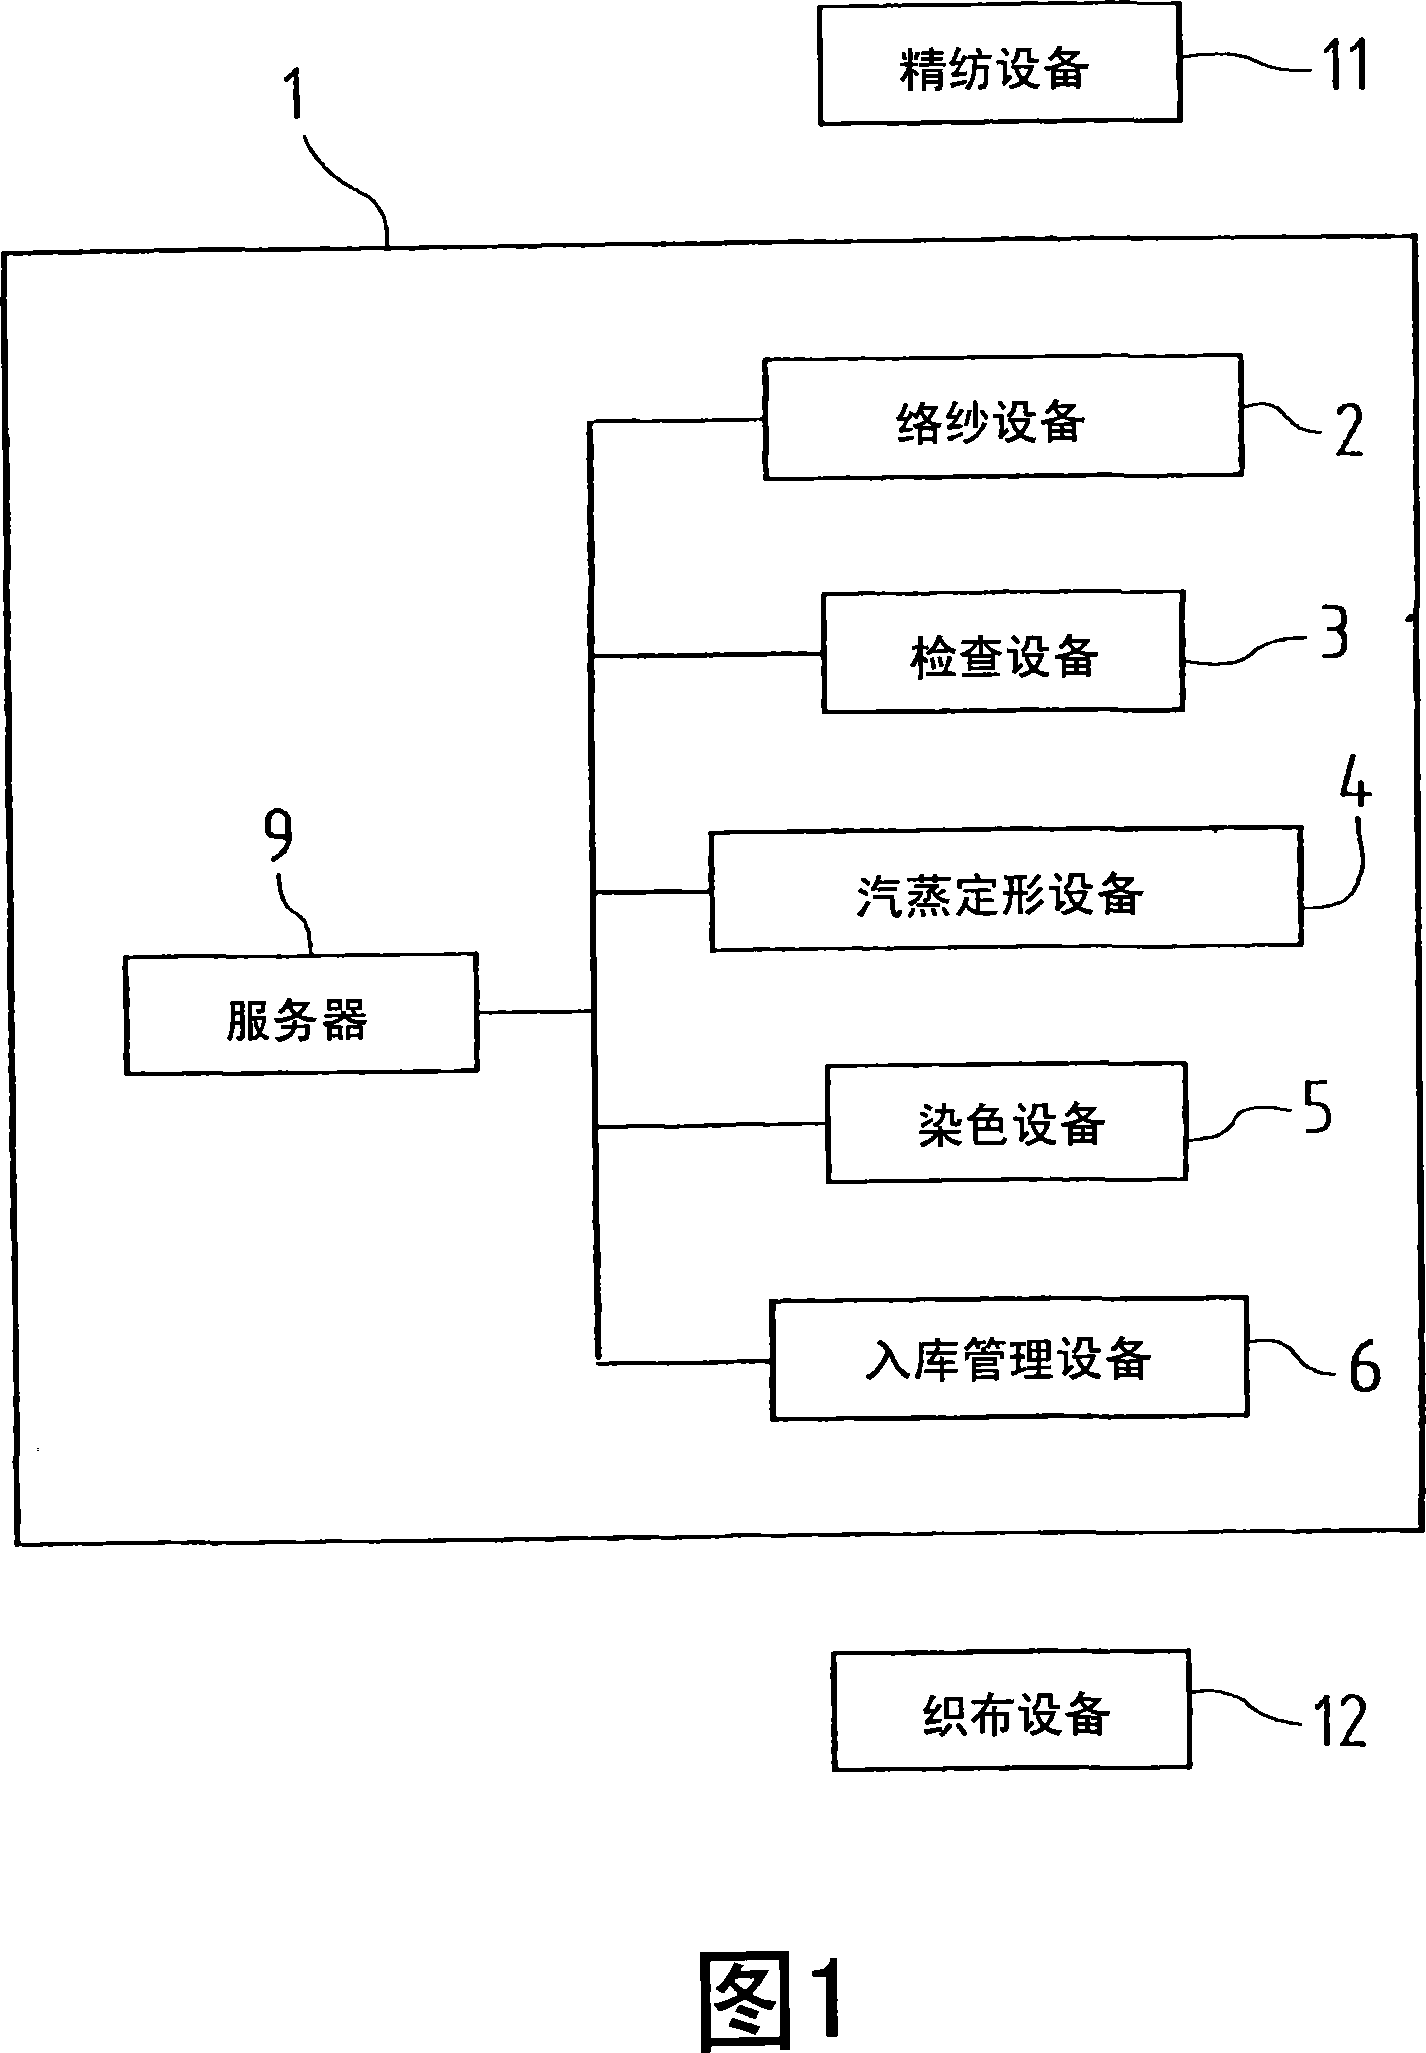 Take-up tube of wound yarn package and device for managing wound yarn package